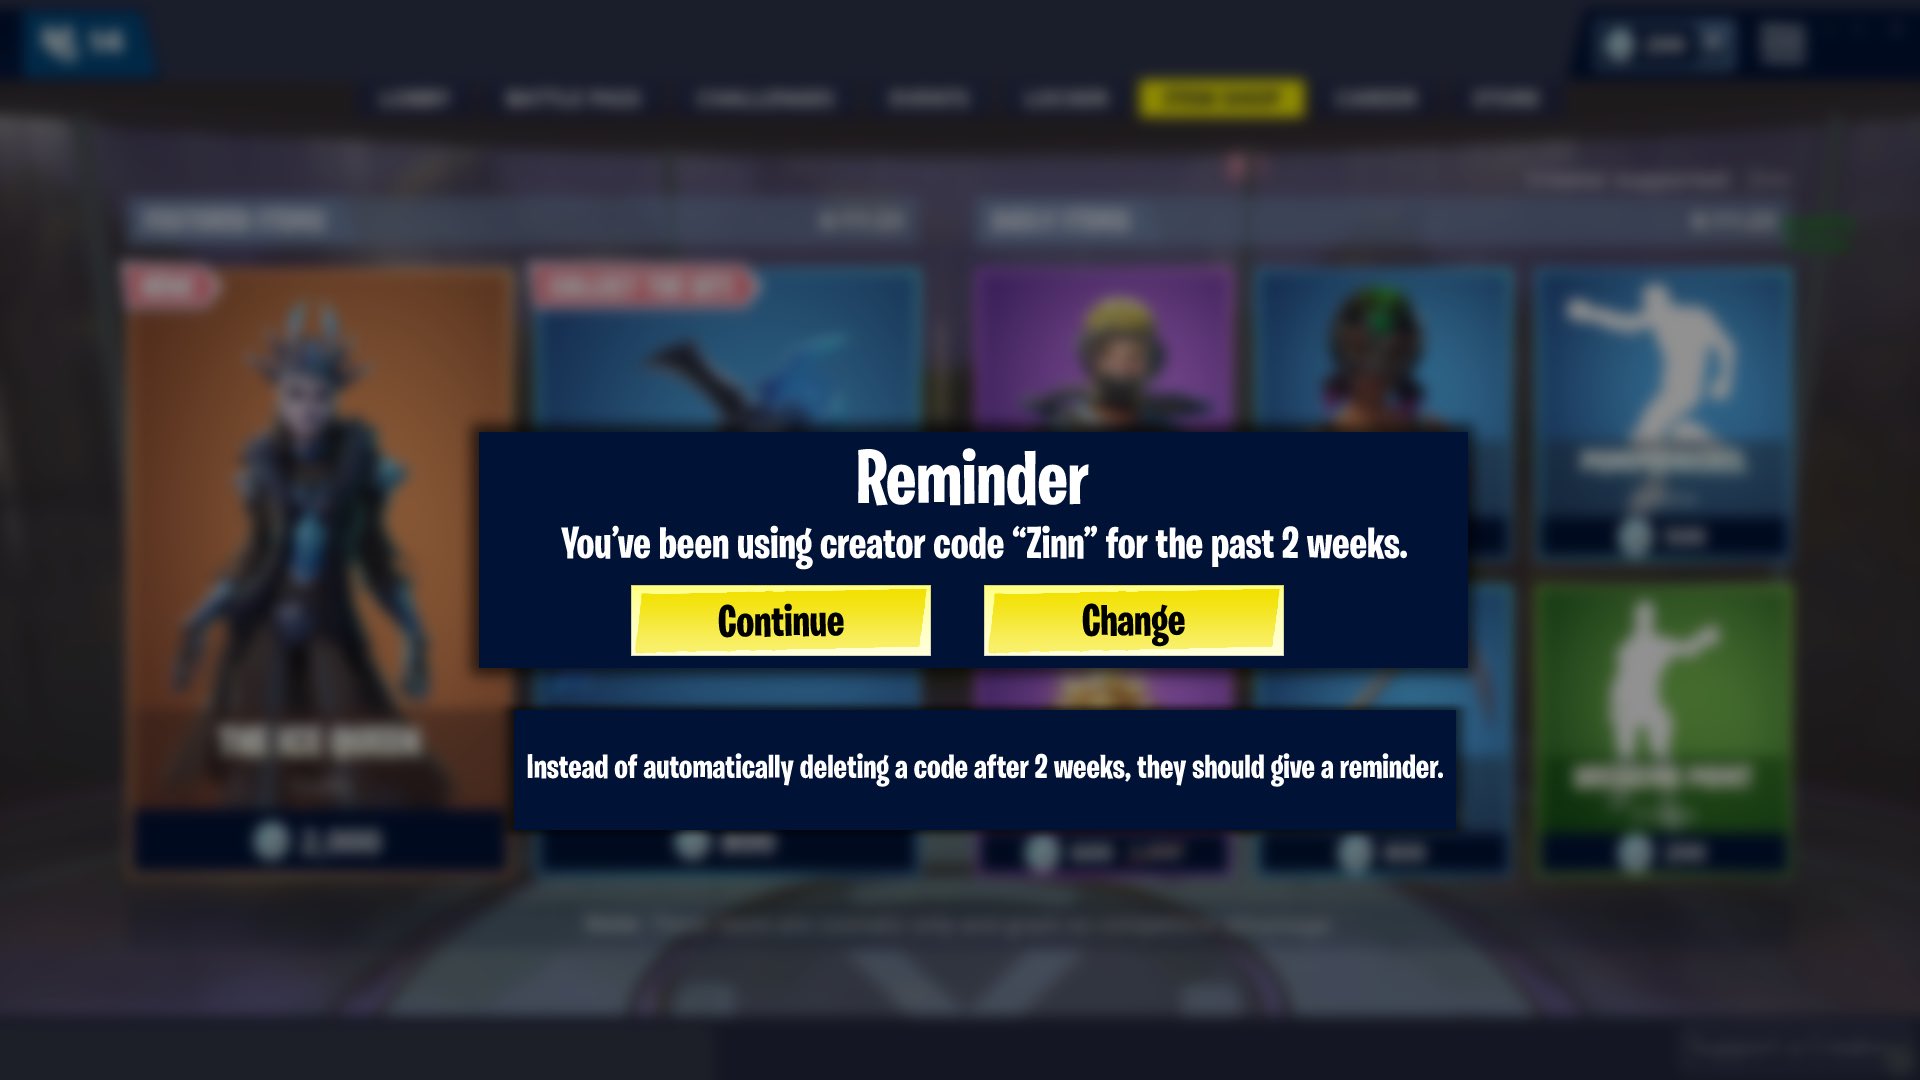 Fortnite Mikey News On Twitter Suggestion Instead Of Removing A Creator Code From Our Shop After 2 Weeks Fortnite Should Just Remind Us Instead Fortnite Https T Co Wlhddoqymx